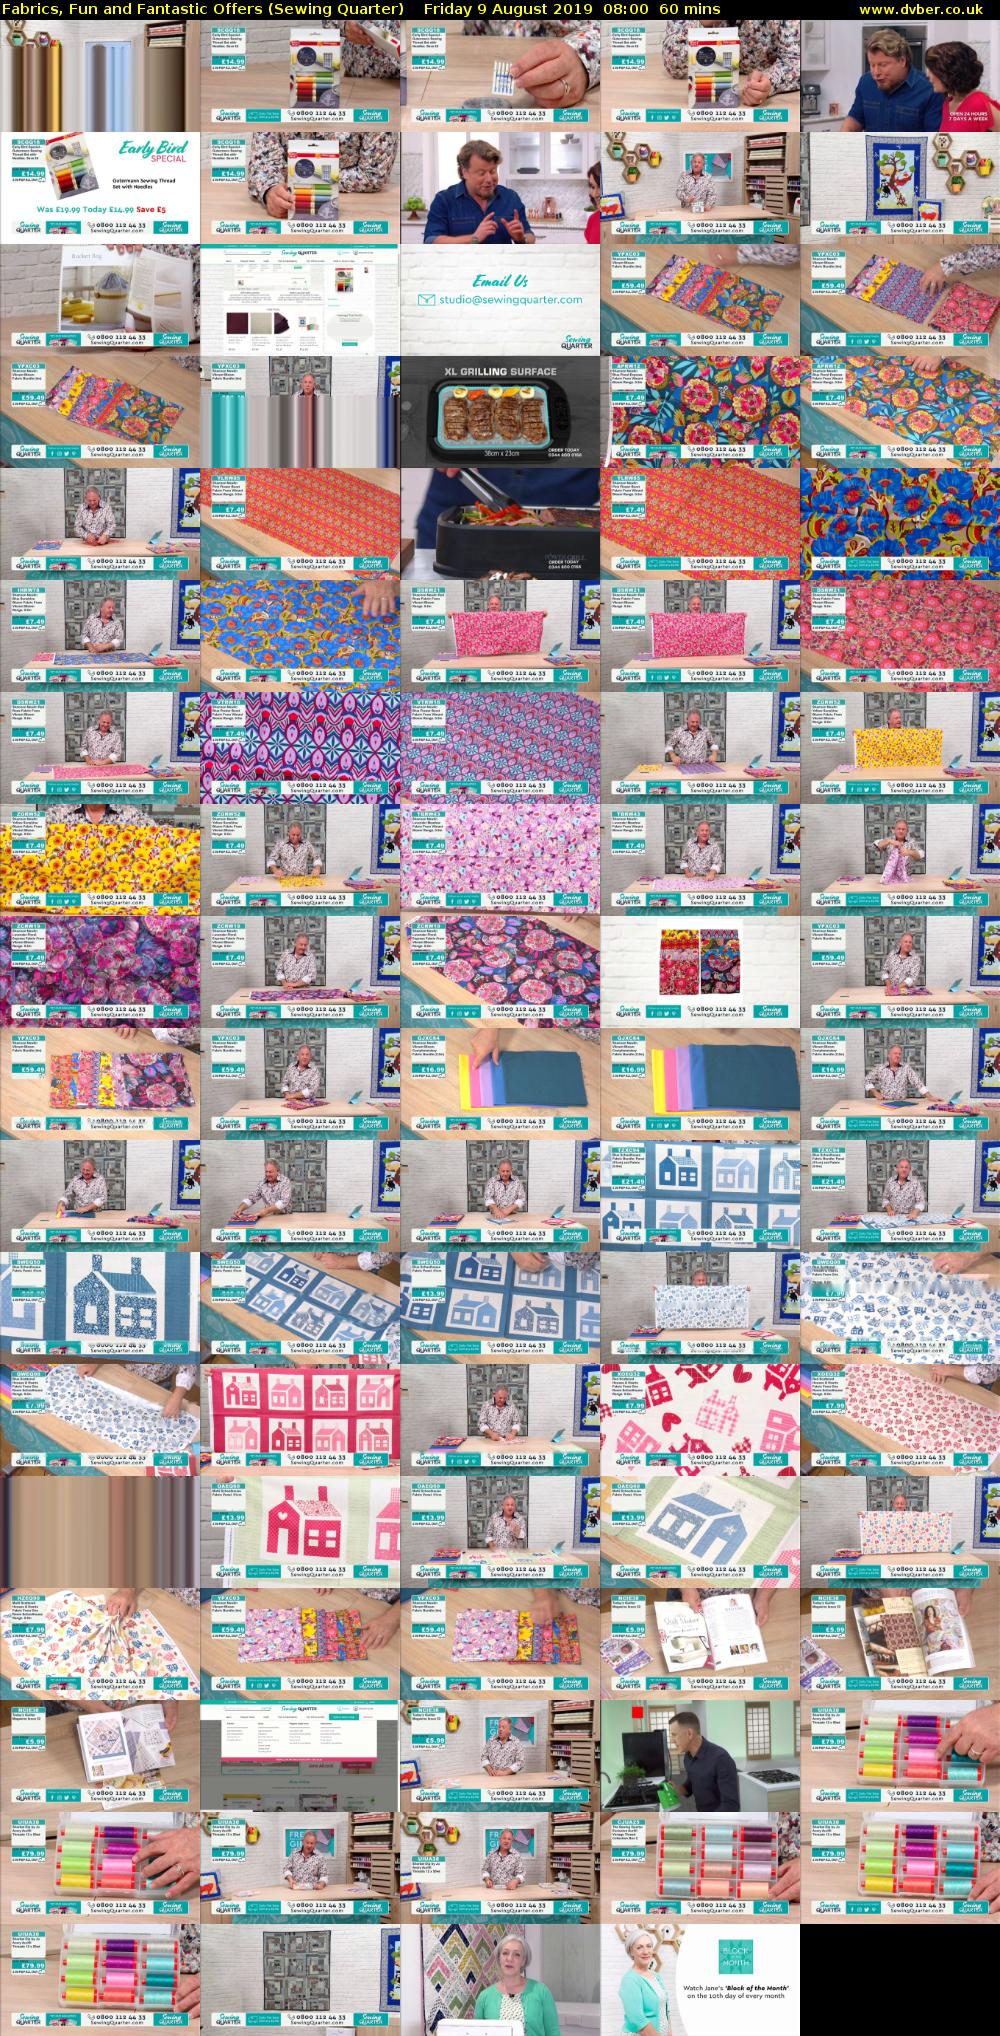 Fabrics, Fun and Fantastic Offers (Sewing Quarter) Friday 9 August 2019 08:00 - 09:00